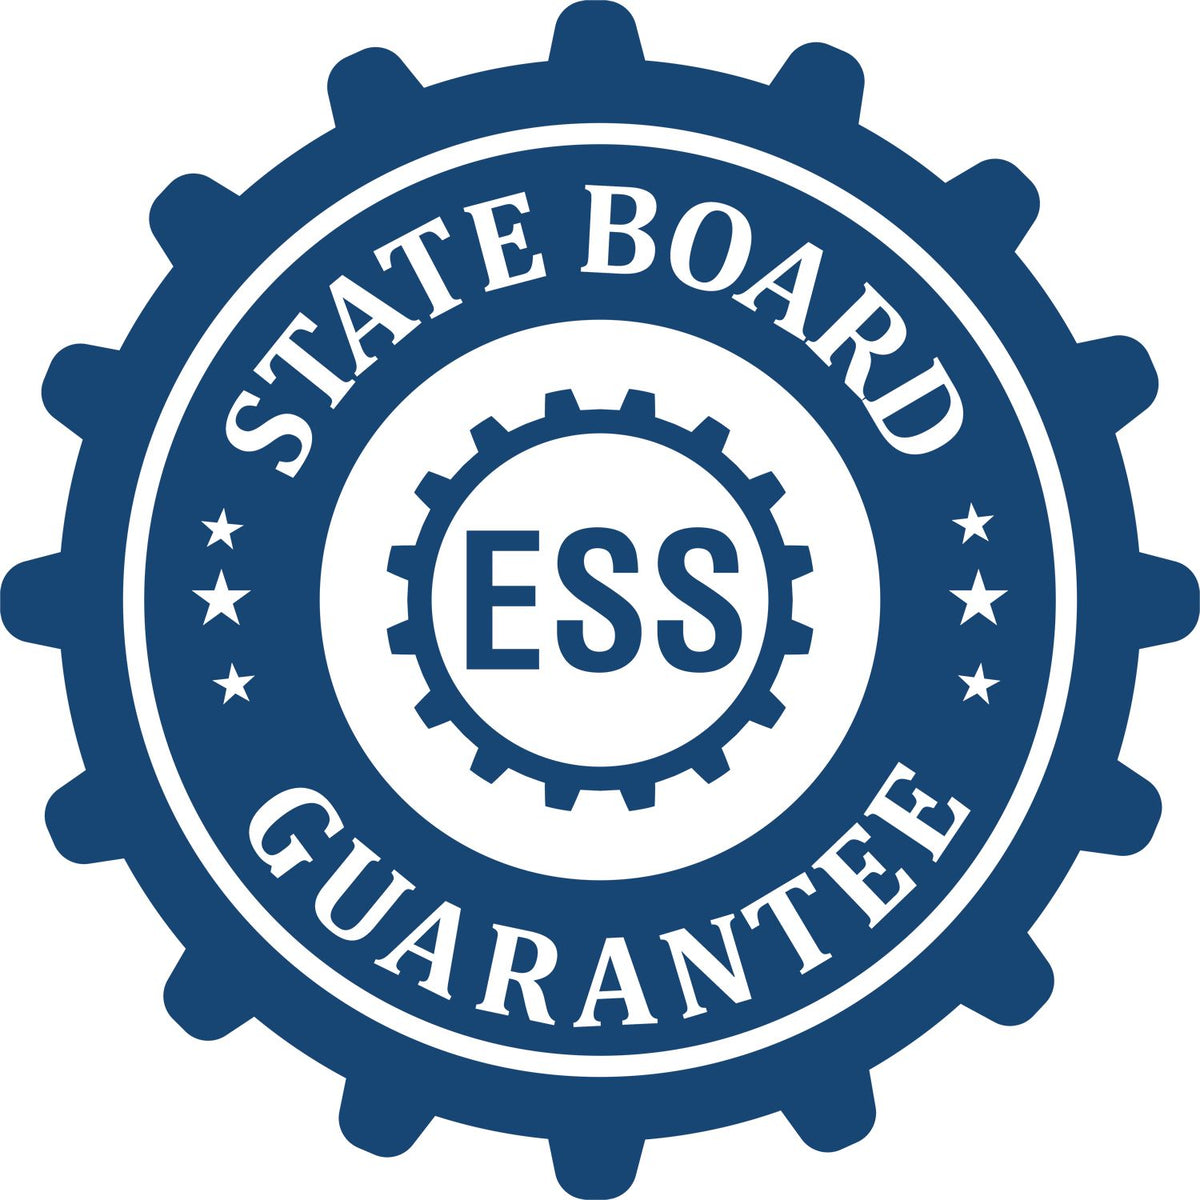 An emblem in a gear shape illustrating a state board guarantee for the State of South Dakota Extended Long Reach Geologist Seal